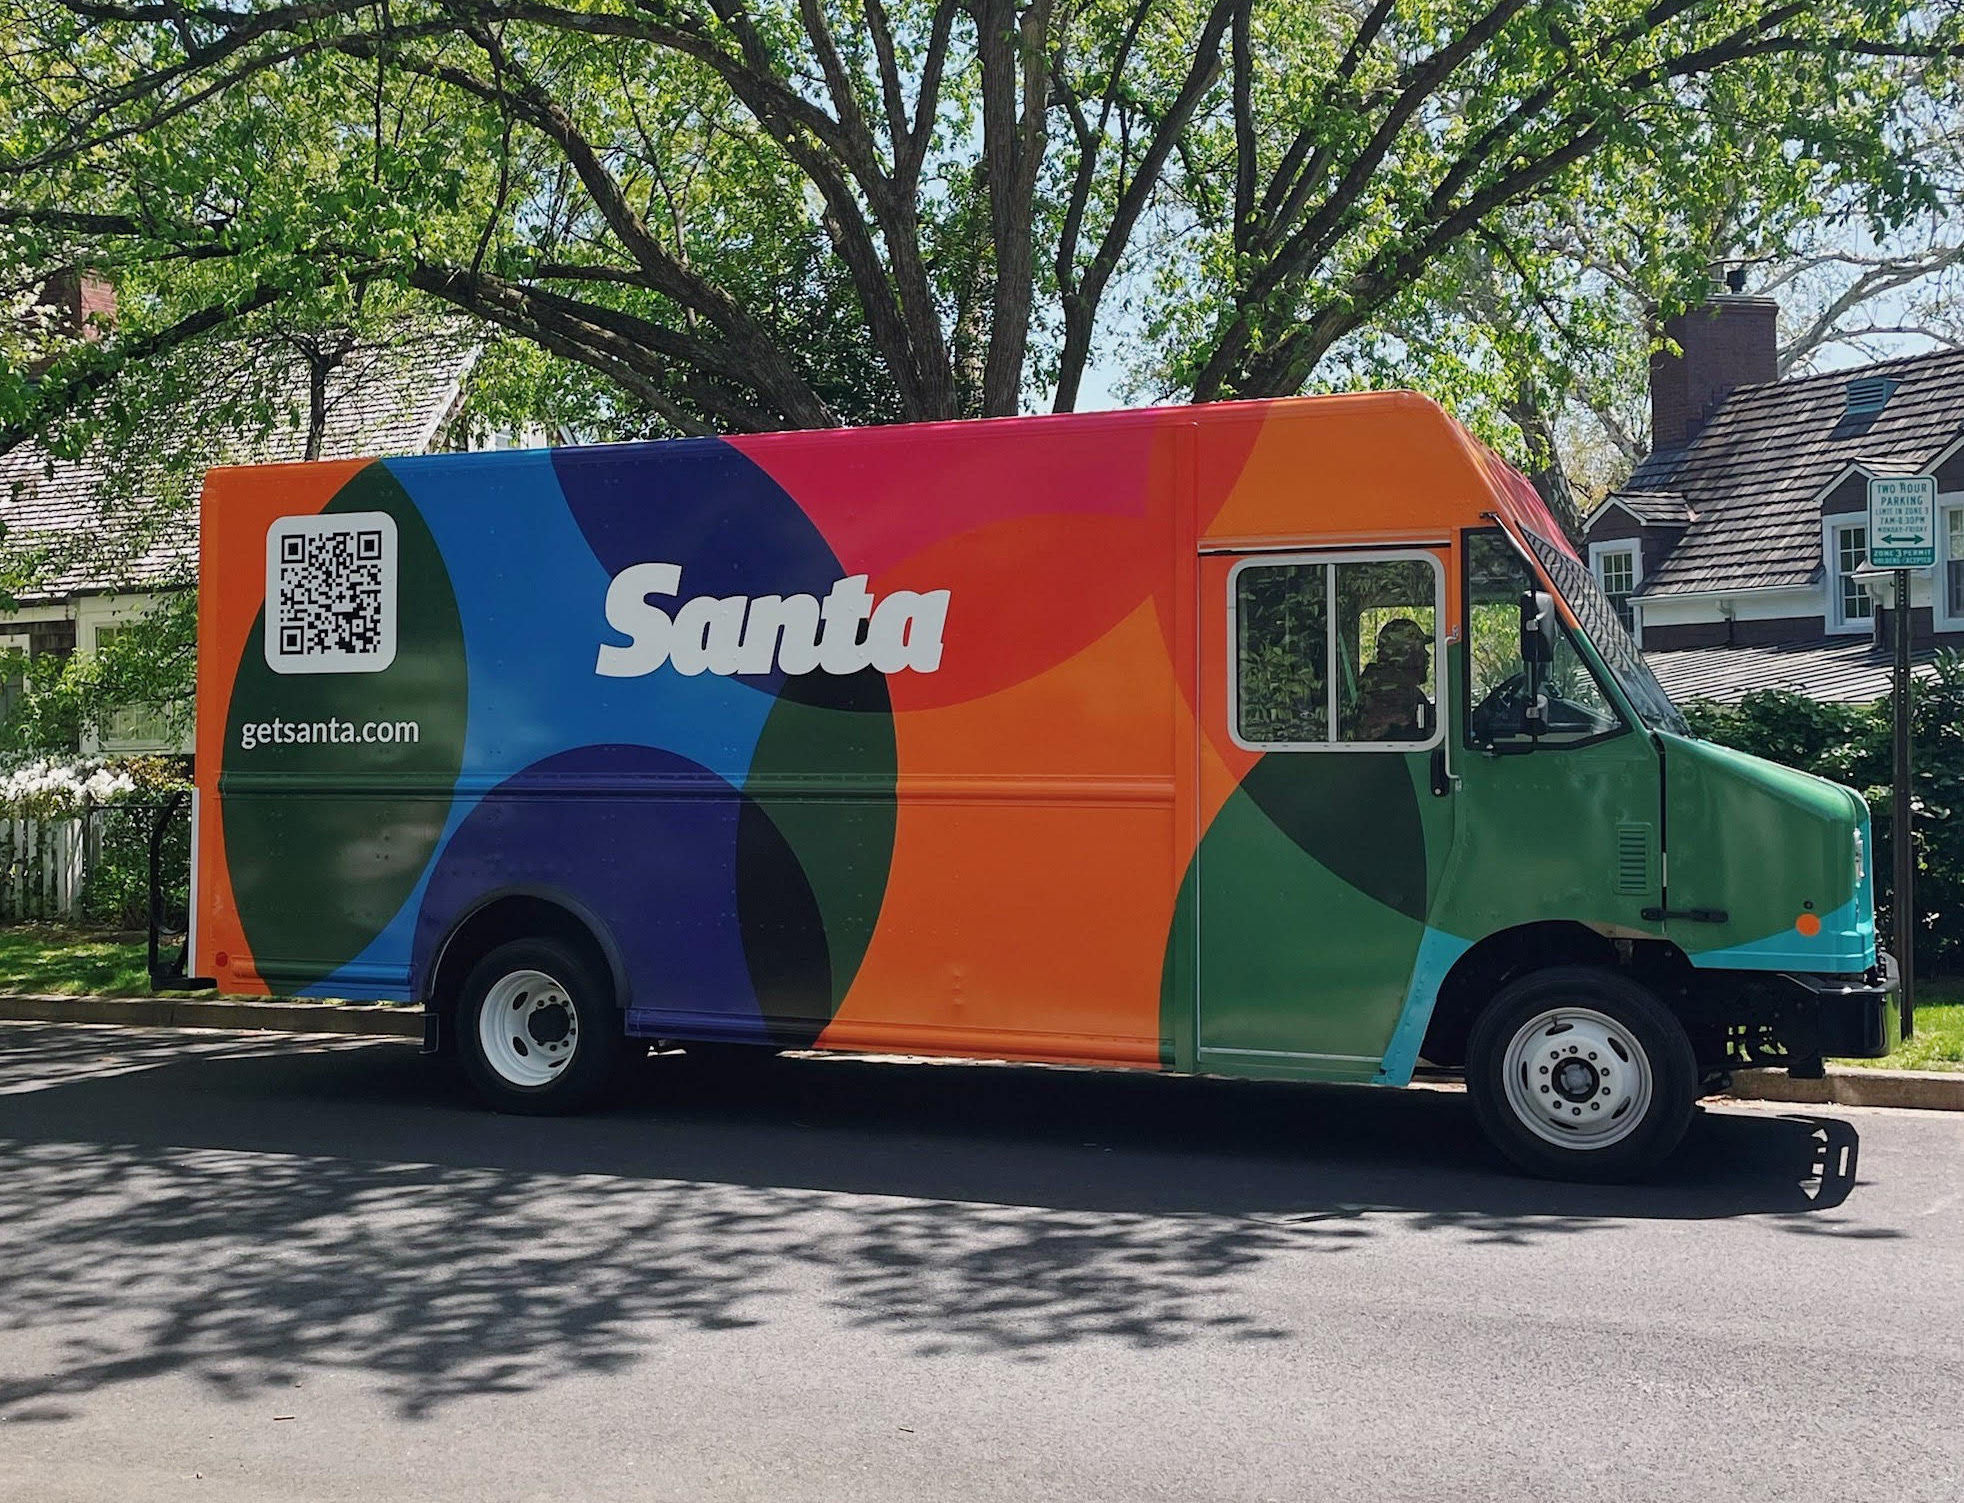 A giant, colorful truck in front of a tree.